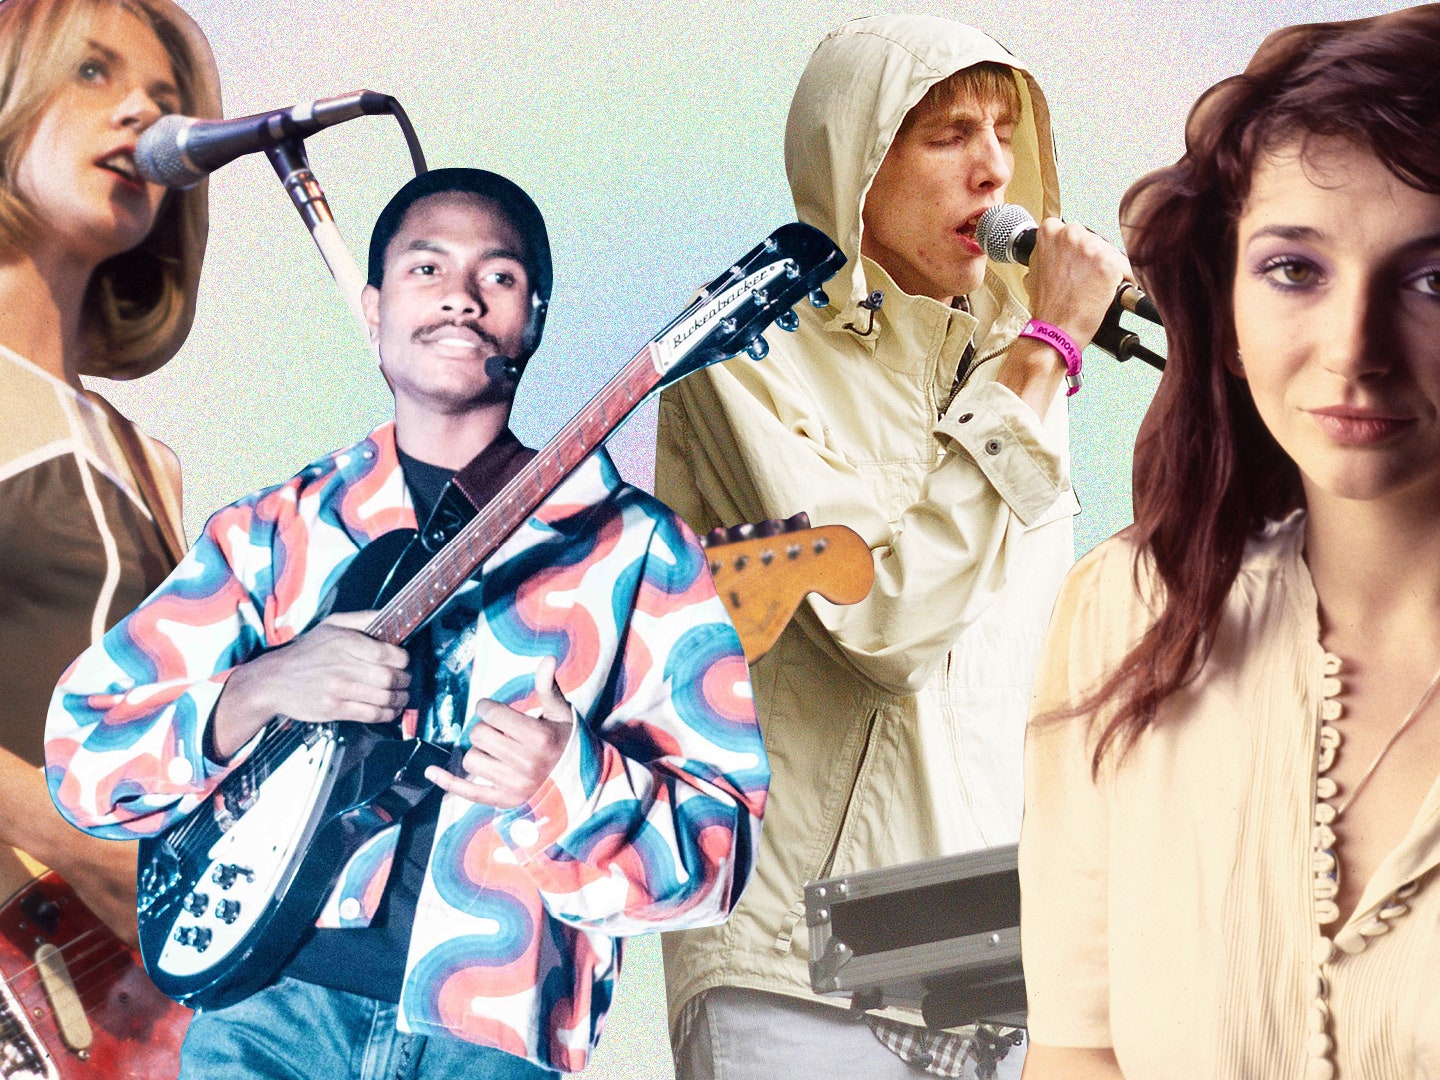 From Deerhunter to Mitski, These 14 Songs Are Your Antidote to Michael Bublé and Marvin Gaye. them